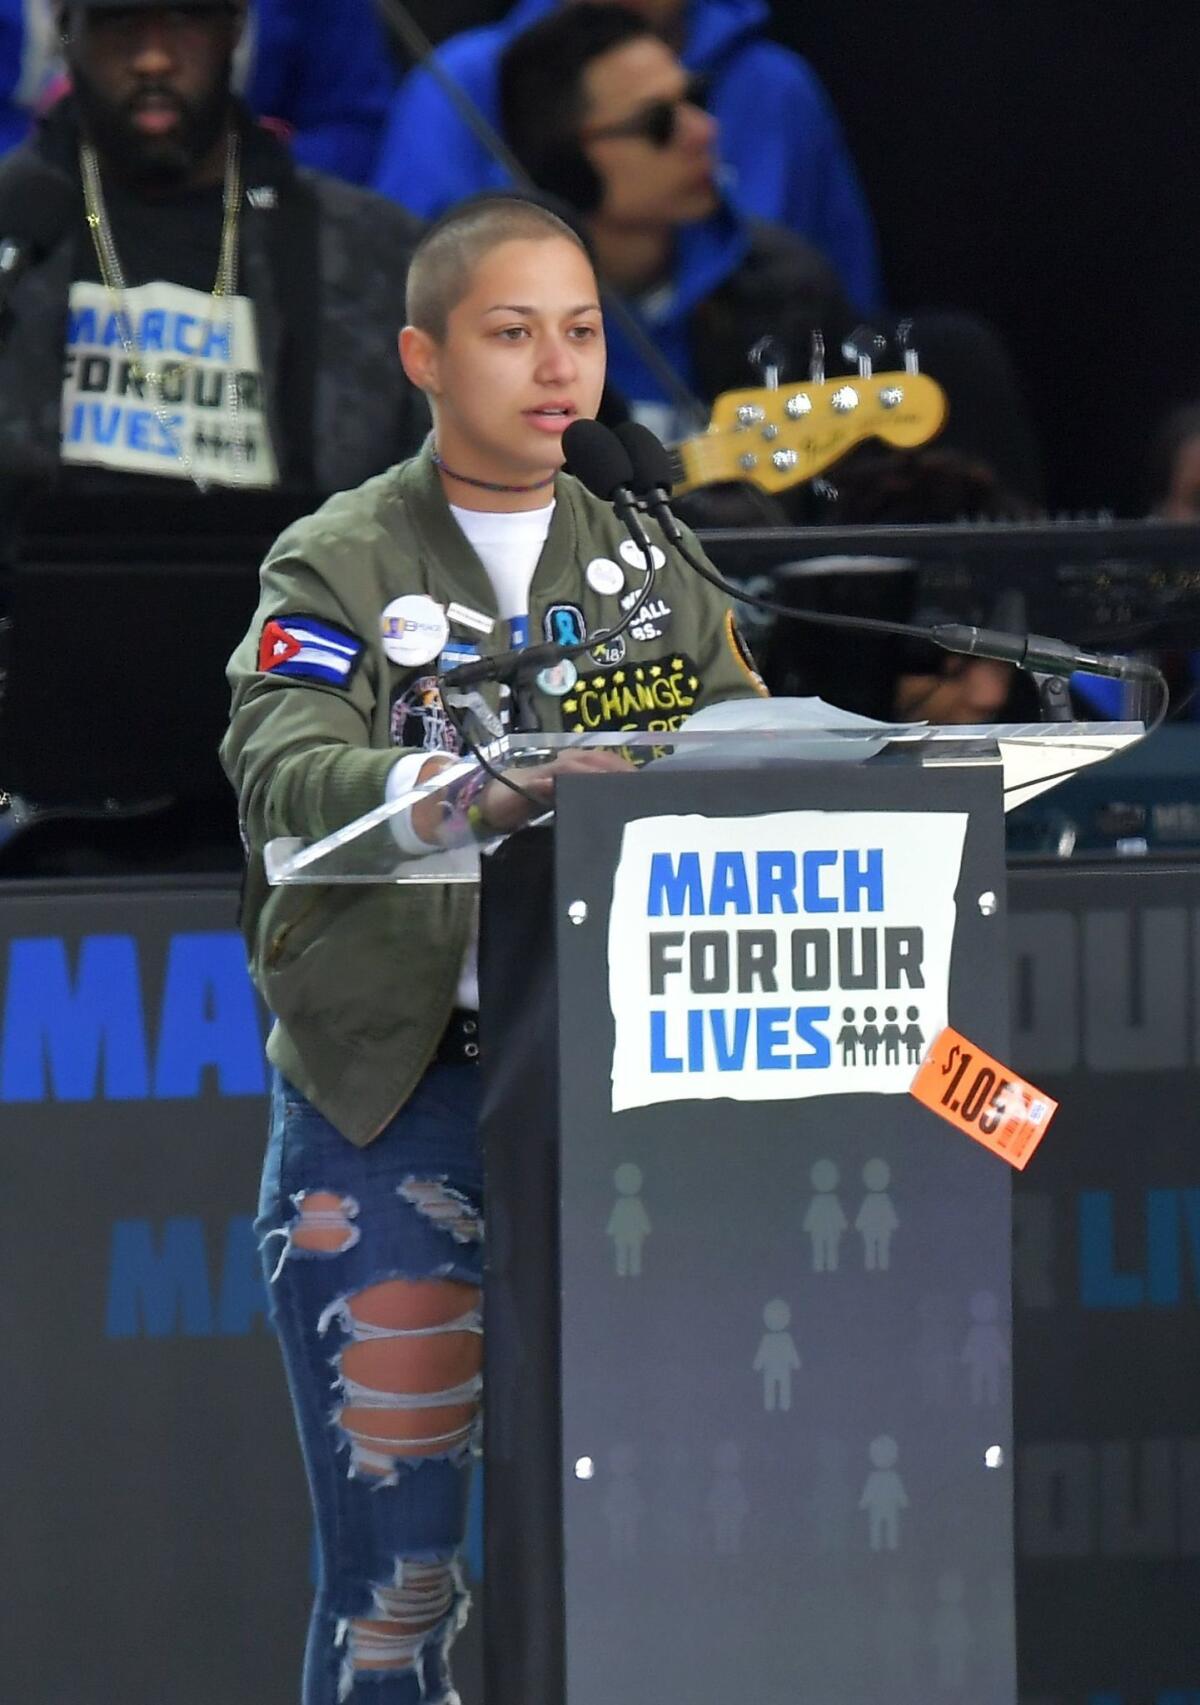 Marjory Stoneman Douglas High School student Emma Gonzalez speaks during the March for Our Lives Rally in Washington, D.C.